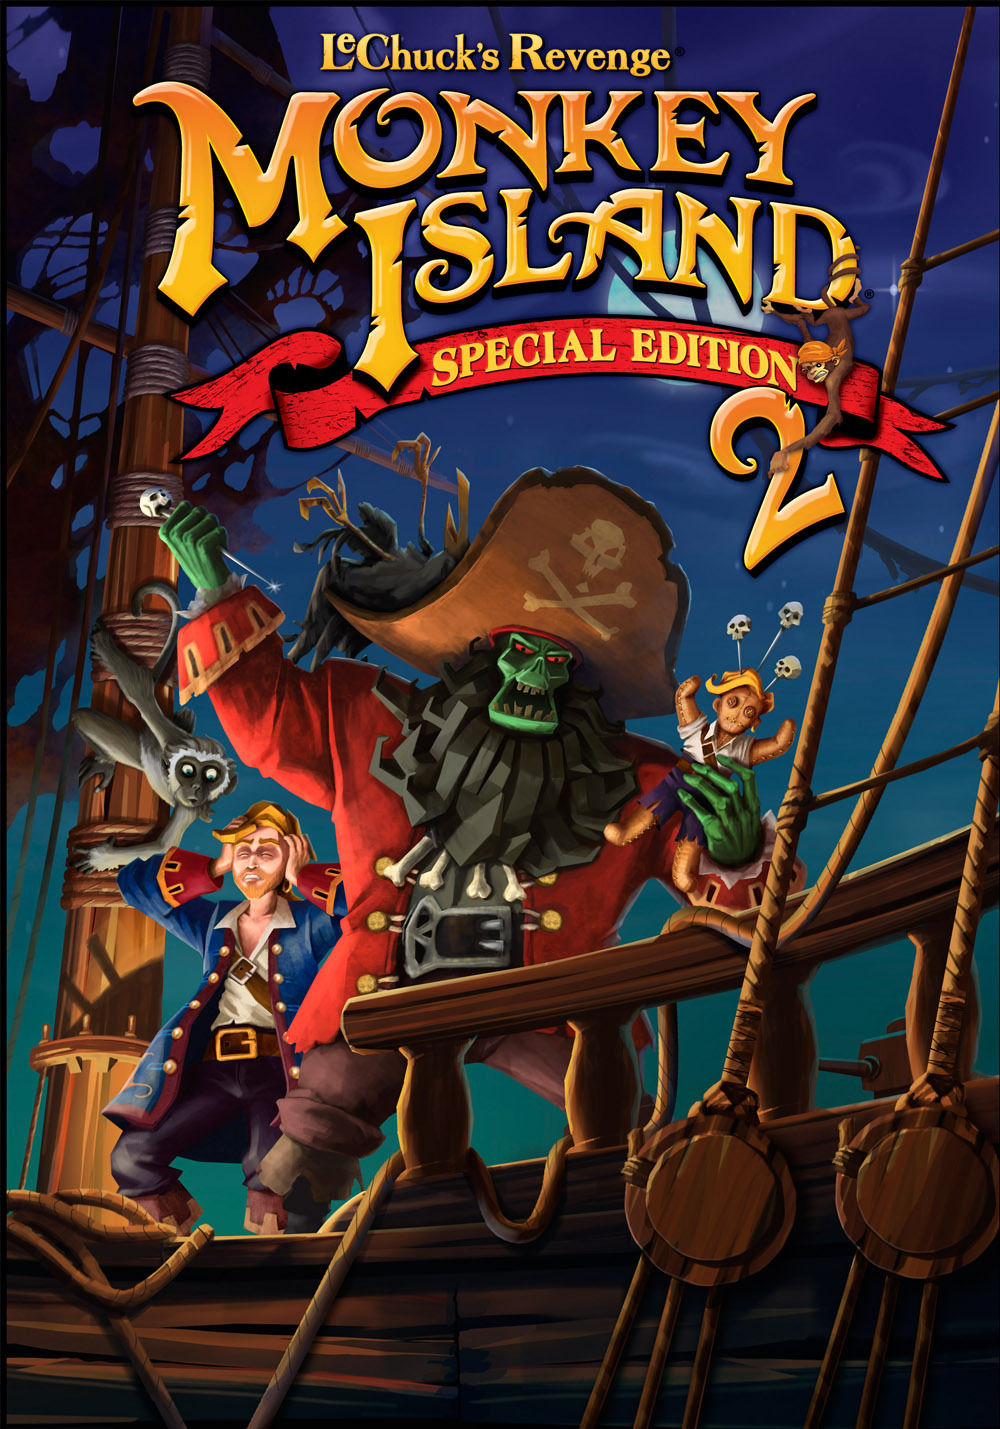 the secret of monkey island special edition on wii